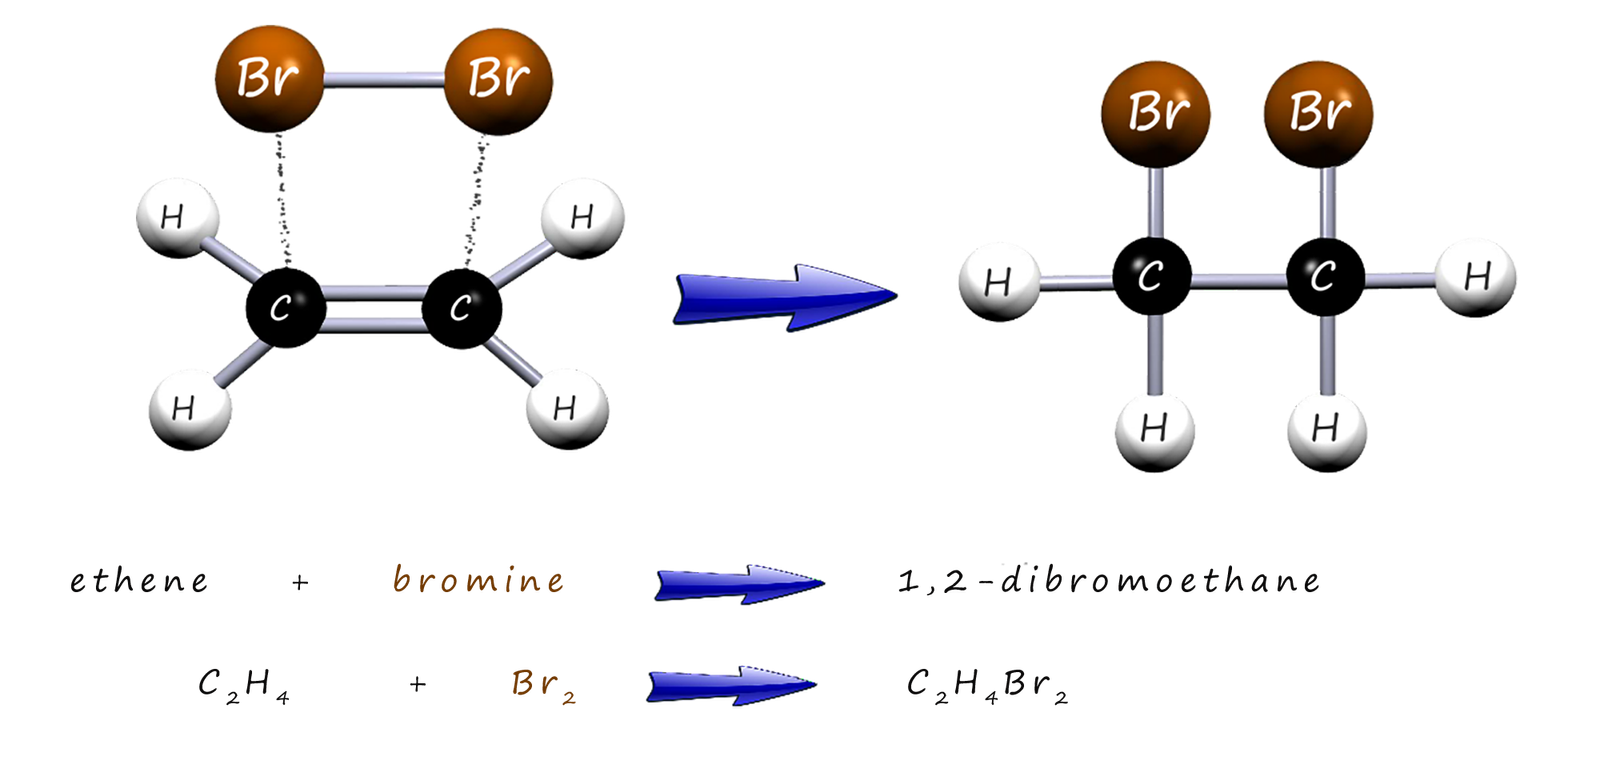 model, word and symbolic equations to show the addition of bromine to an unsaturated alkene molcule, ethene in this example.